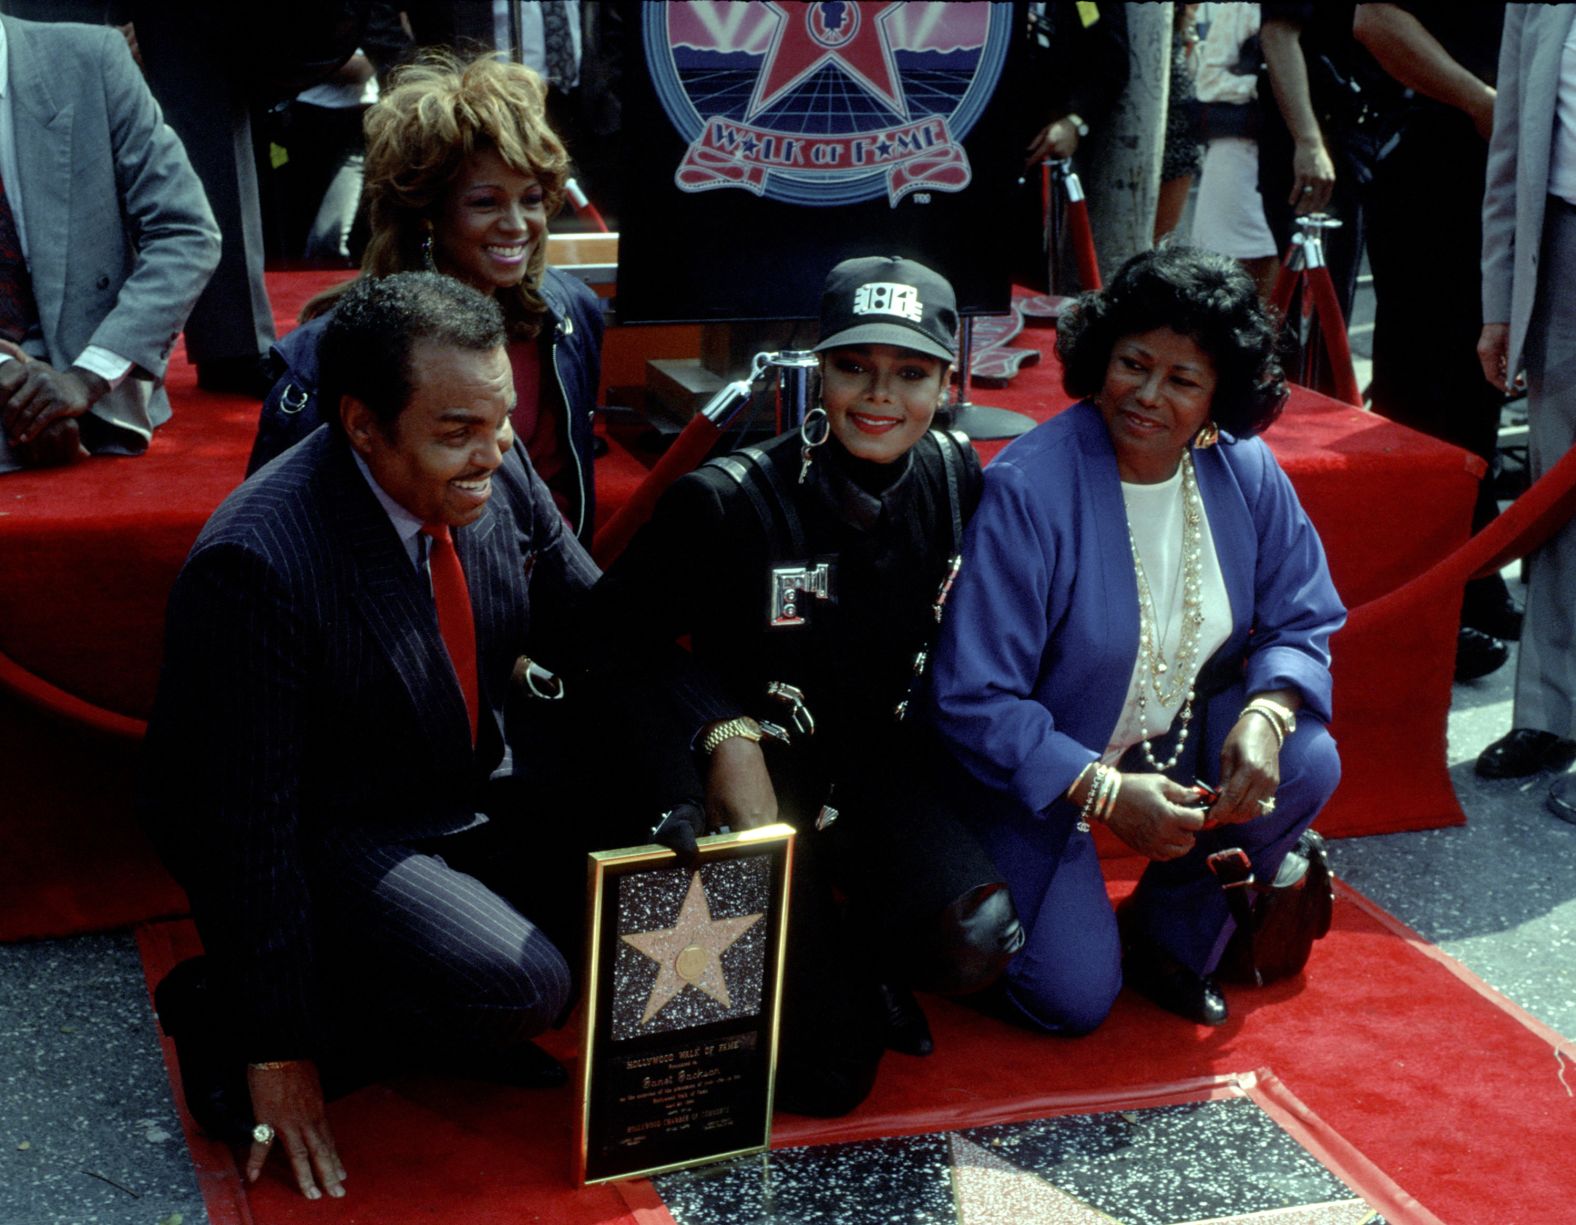 Janet Jackson, center, receives a star on the Hollywood Walk of Fame with her parents, Joe and Katherine Jackson, in 1990.